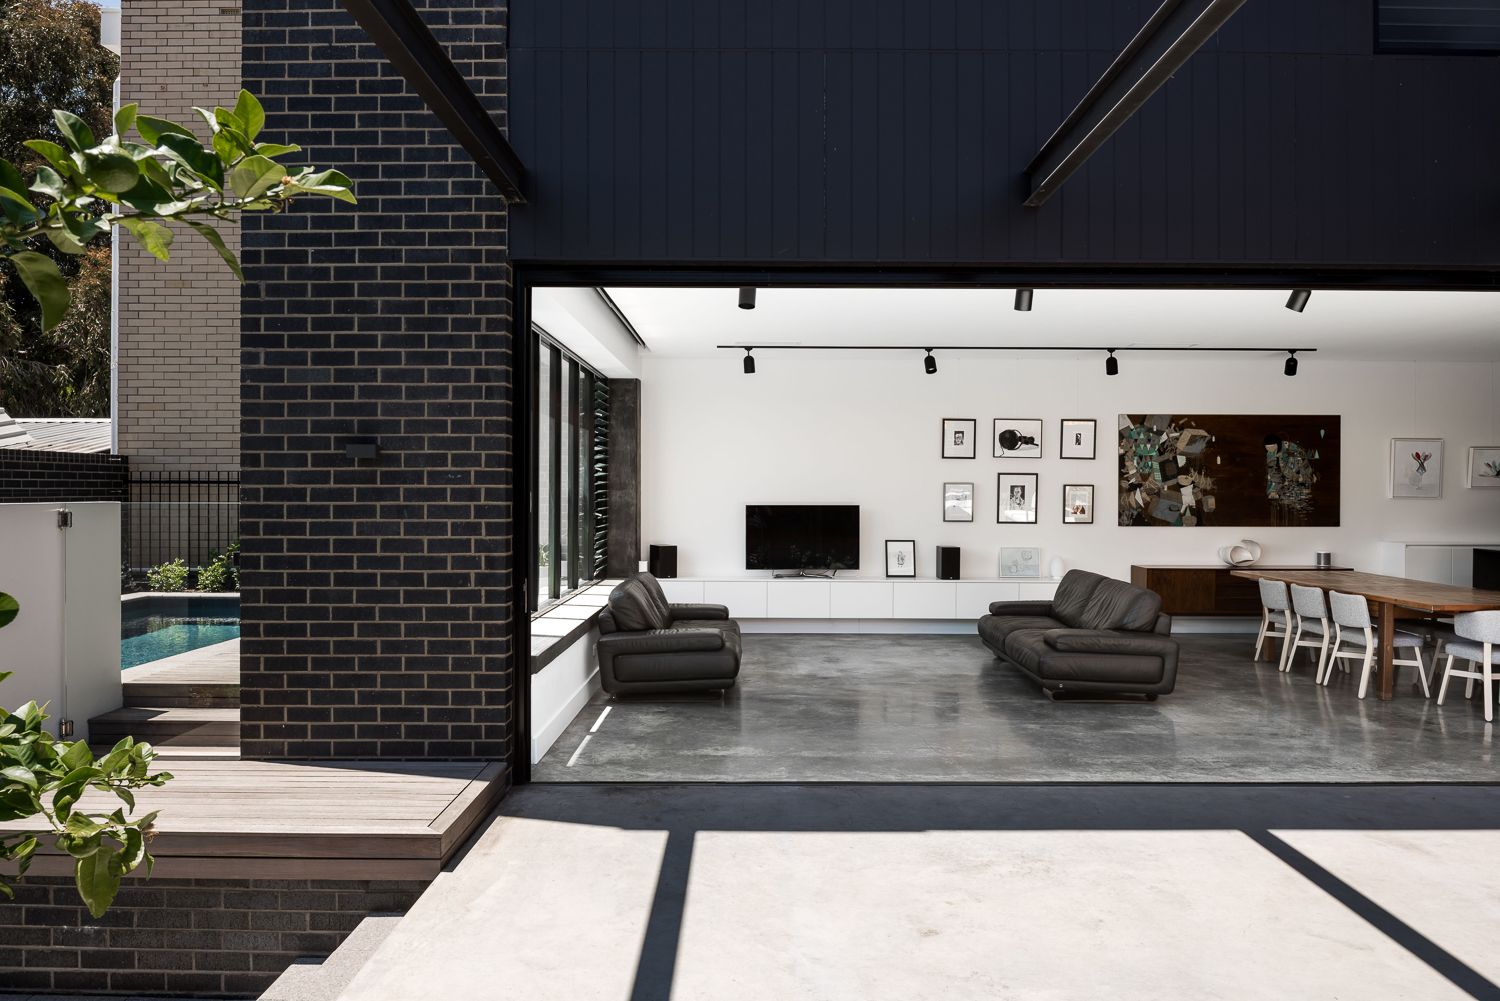 Urban House by Robeson Architects. Ultra modern indoor and outdoor living areas. Polished concrete interior with white walls and black furniture, feature lighting and window frames. Exterior area has concrete flooring, black brick walls and sunken pool in timber deck. 